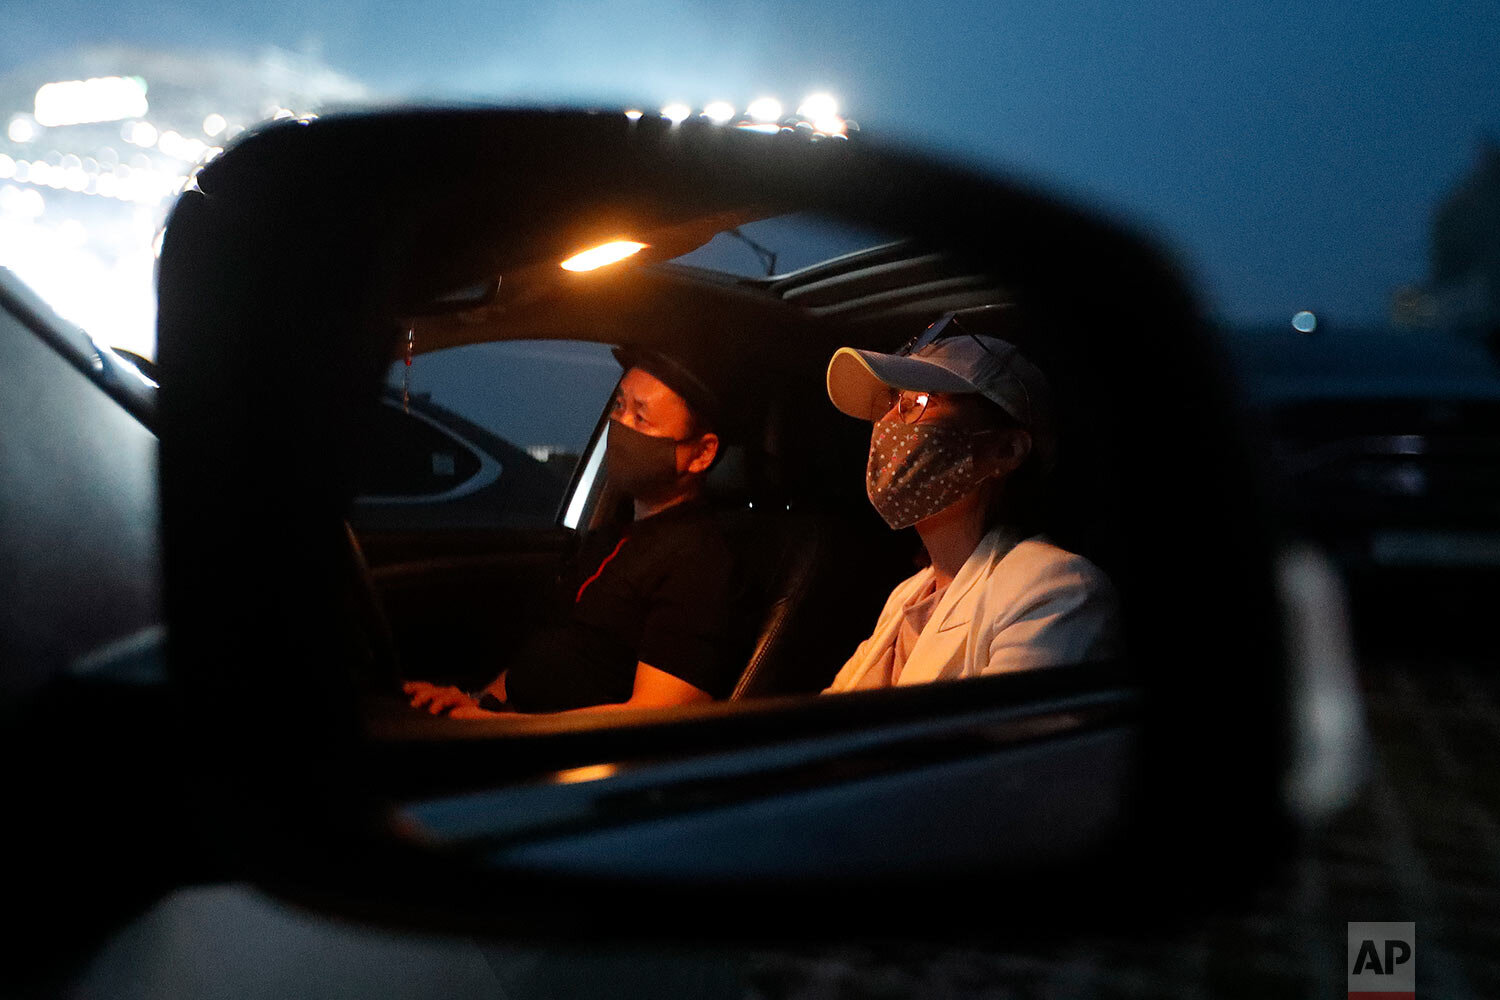  People sit in their car as they watch the Stage X drive-in concert at KINTEX parking lot in Goyang, South Korea, Saturday, May 23, 2020. (AP Photo/Ahn Young-joo) 